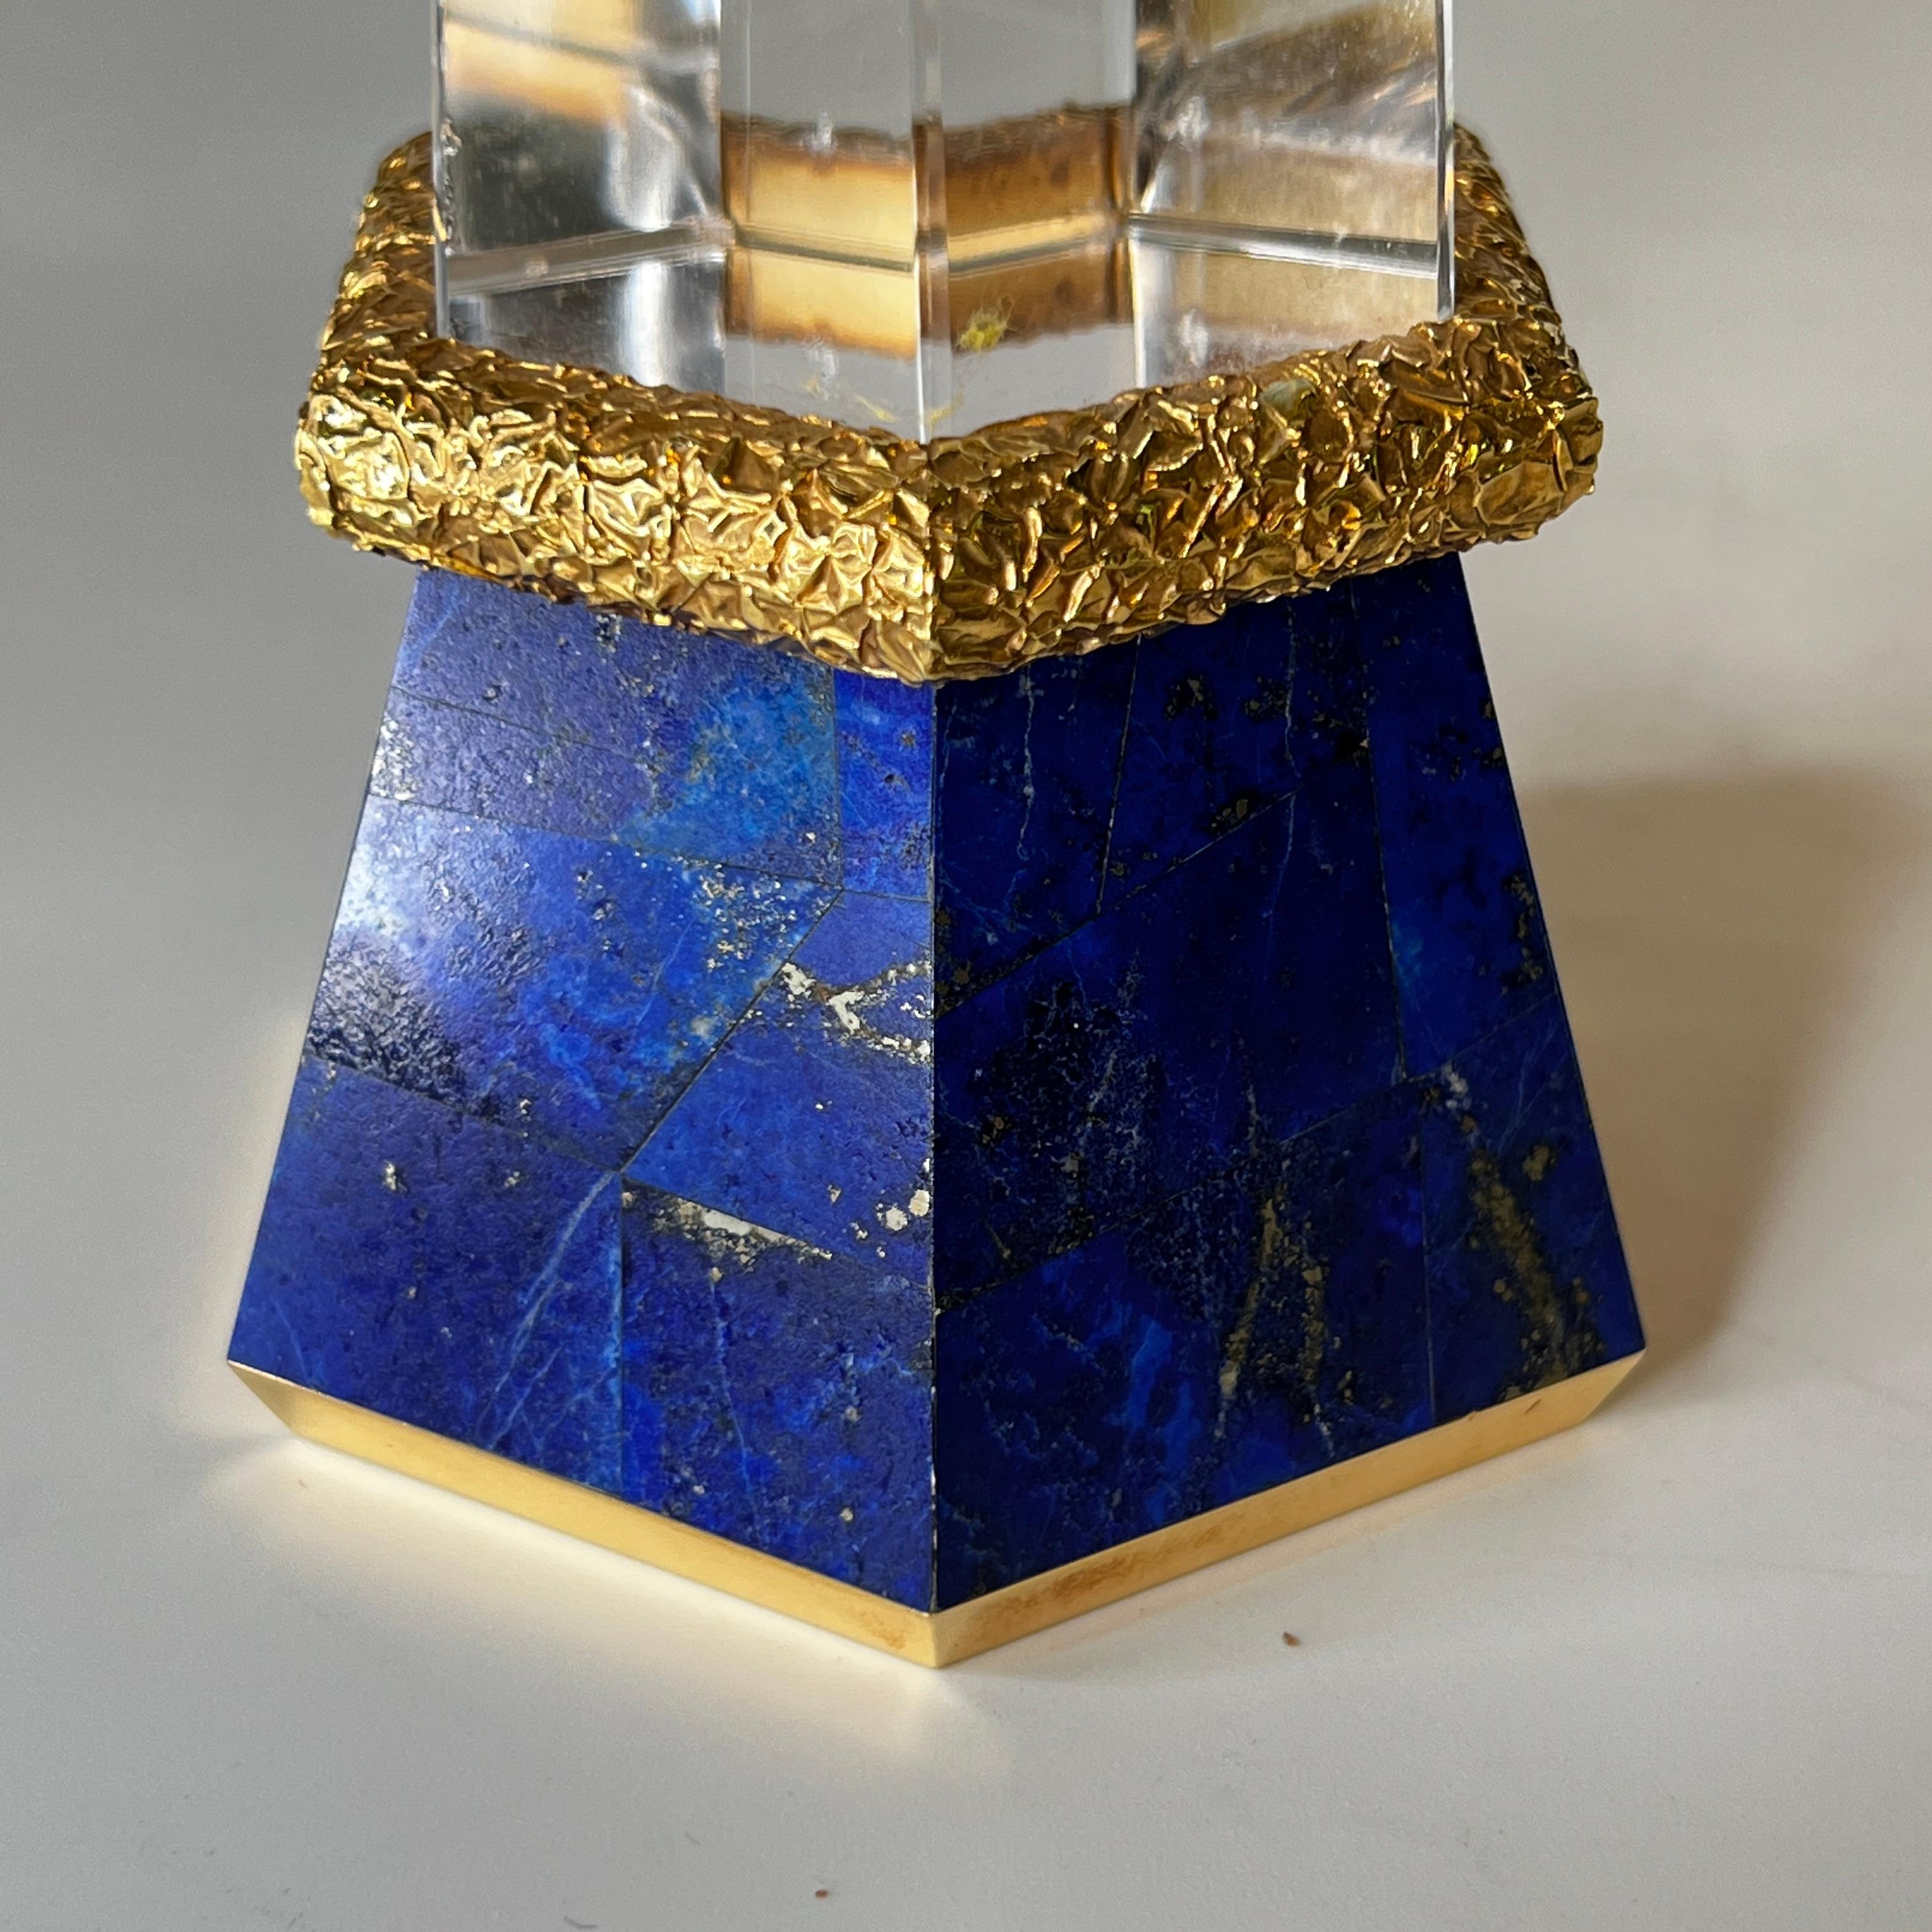 Brass Rock Crystal and Lapis Lazuli Candlesticks For Sale